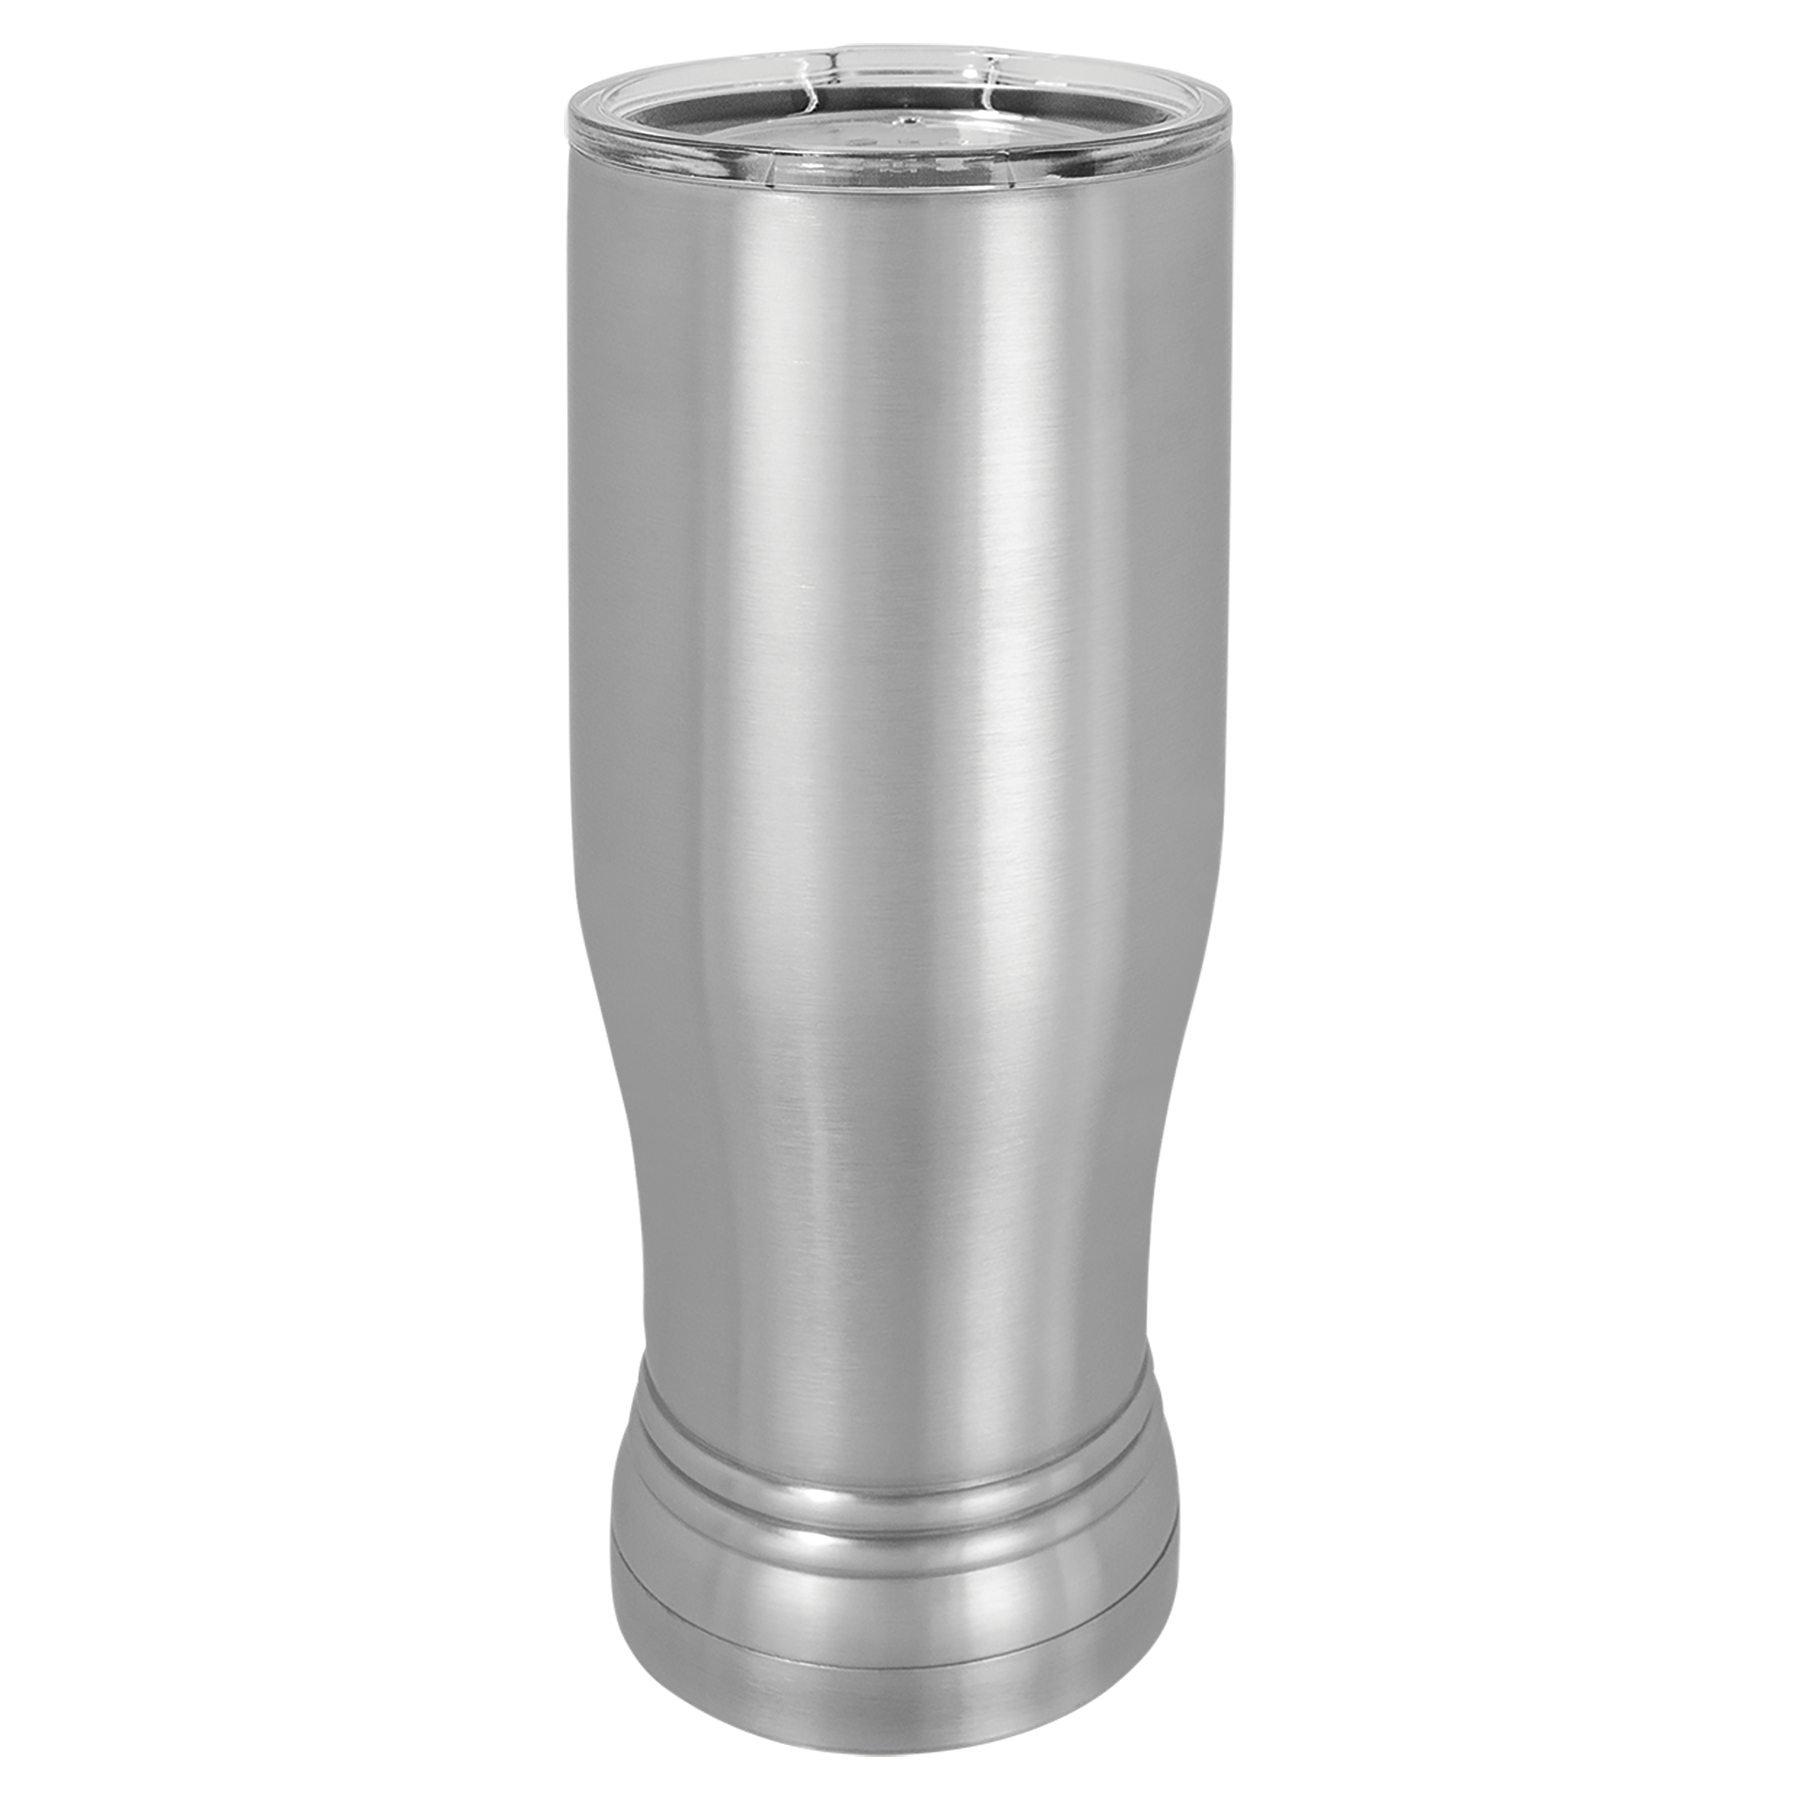 Stainless Steel 14oz Pilsner Tumbler -One Free Engraving  -Fits most Cup Holders  -Double-wall Vacuum Insulated  -Made from 18/8 Gauge Stainless Steel (Type 304 Food Grade)  -Lid is BPA Free (Hand Wash Only)  -Not recommended for Dishwasher  -Works with Cold and Hot Drinks  -17 Color Options  -Perfect for Personalized Gifts, Awards, Incentives, Swag & Fundraisers